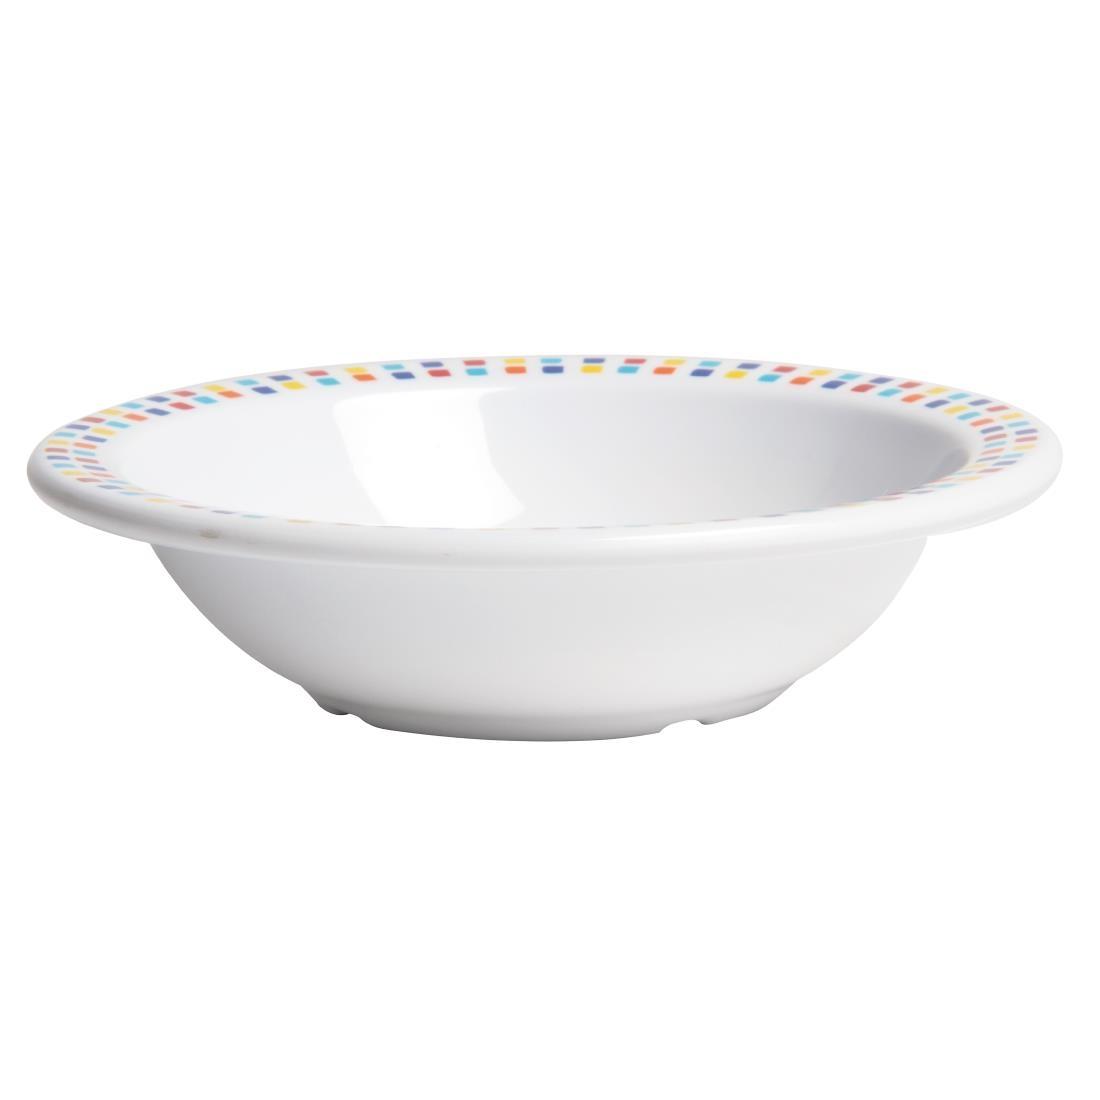 Utopia Spanish Steps Bowls 150mm (Pack of 48) - CE268  - 3